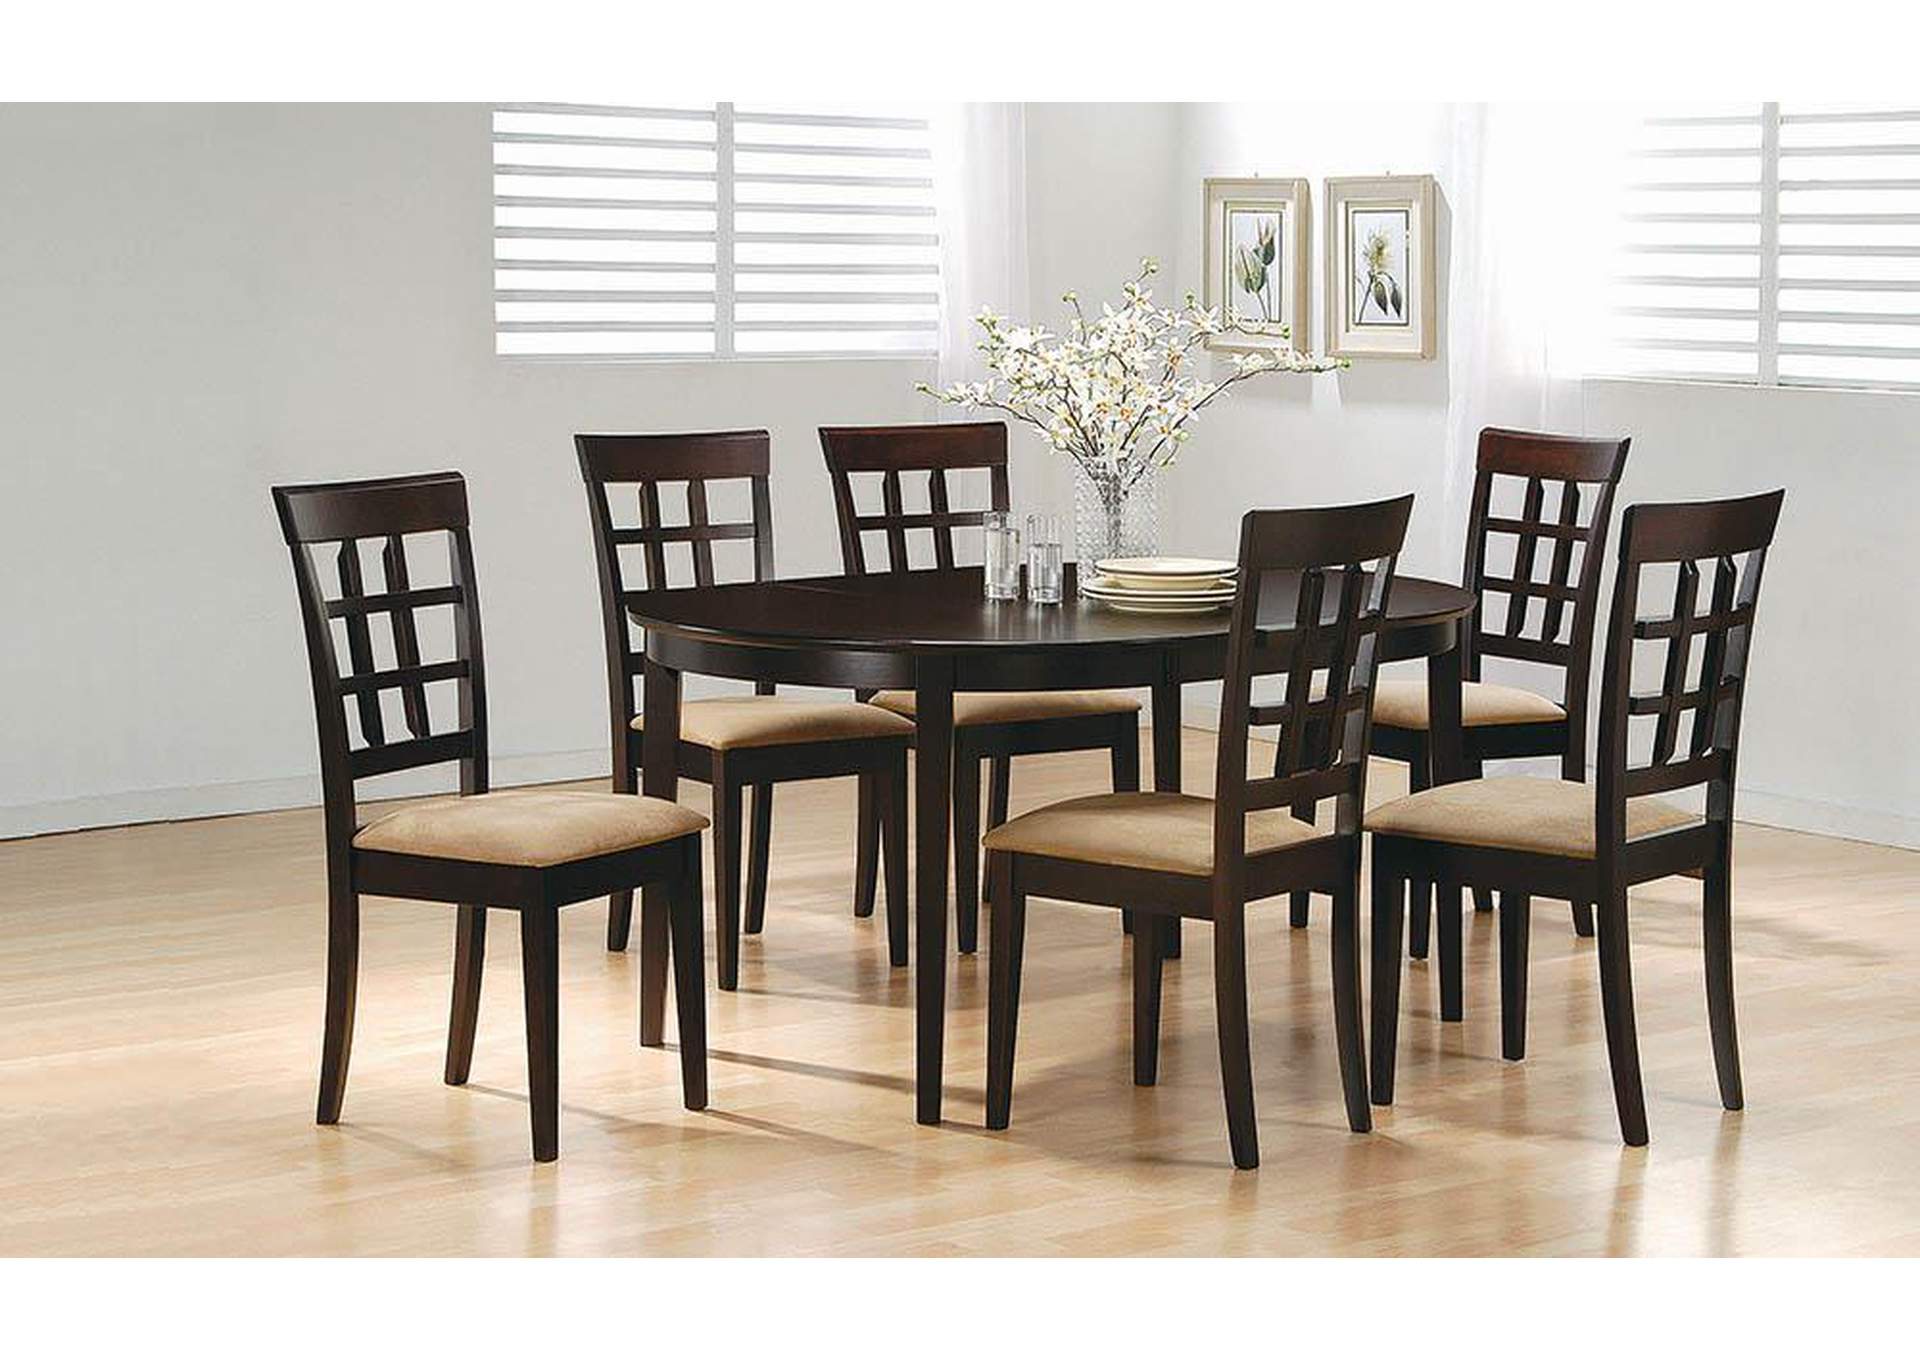 Cappuccino Oval Dining Table,ABF Coaster Furniture